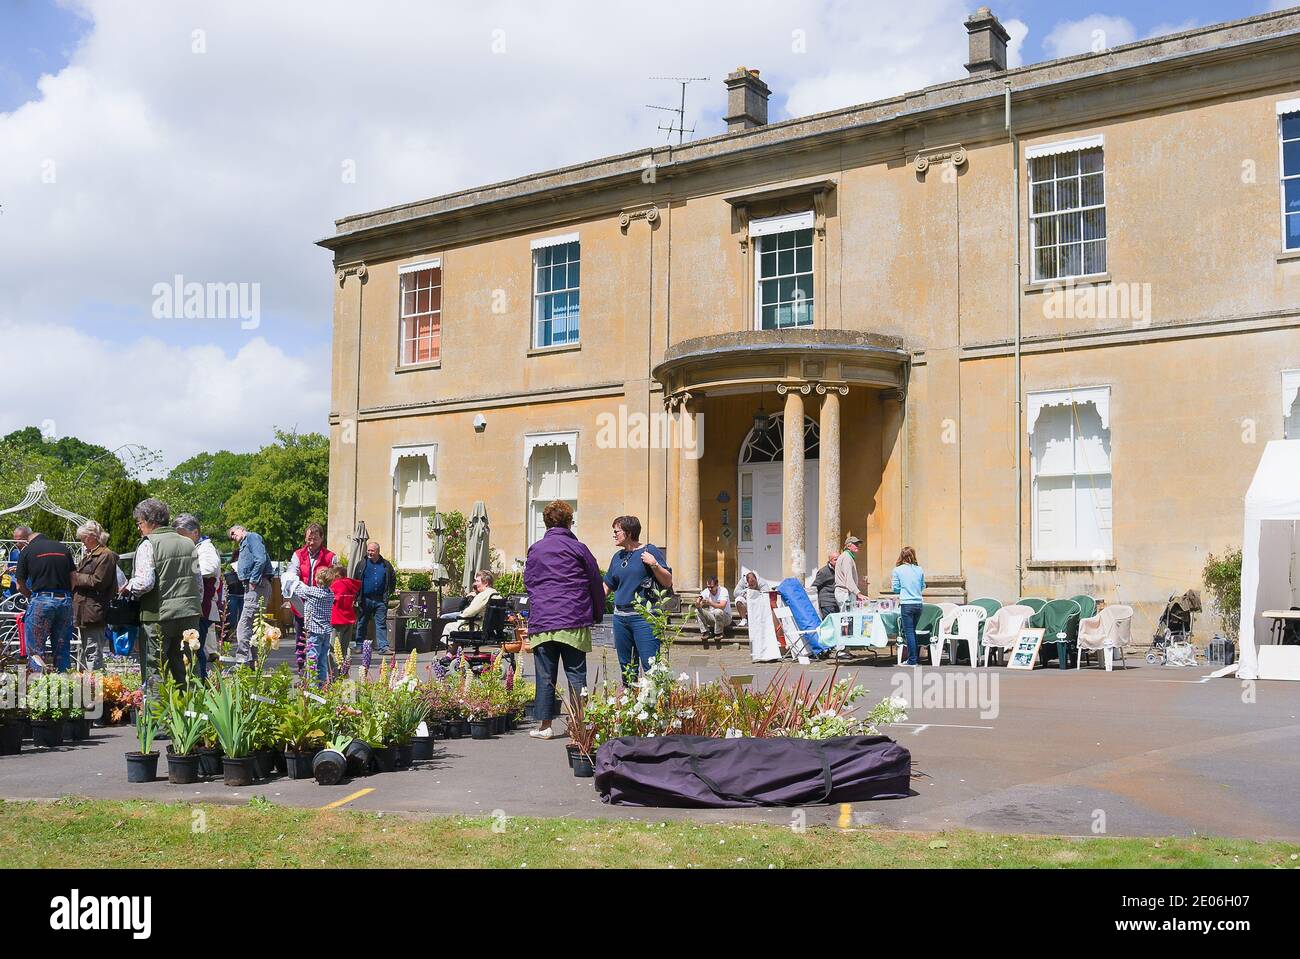 An outdoor plant sale event for charity at Rowdeford house Rowde Devizes Wiltshire England UK Stock Photo